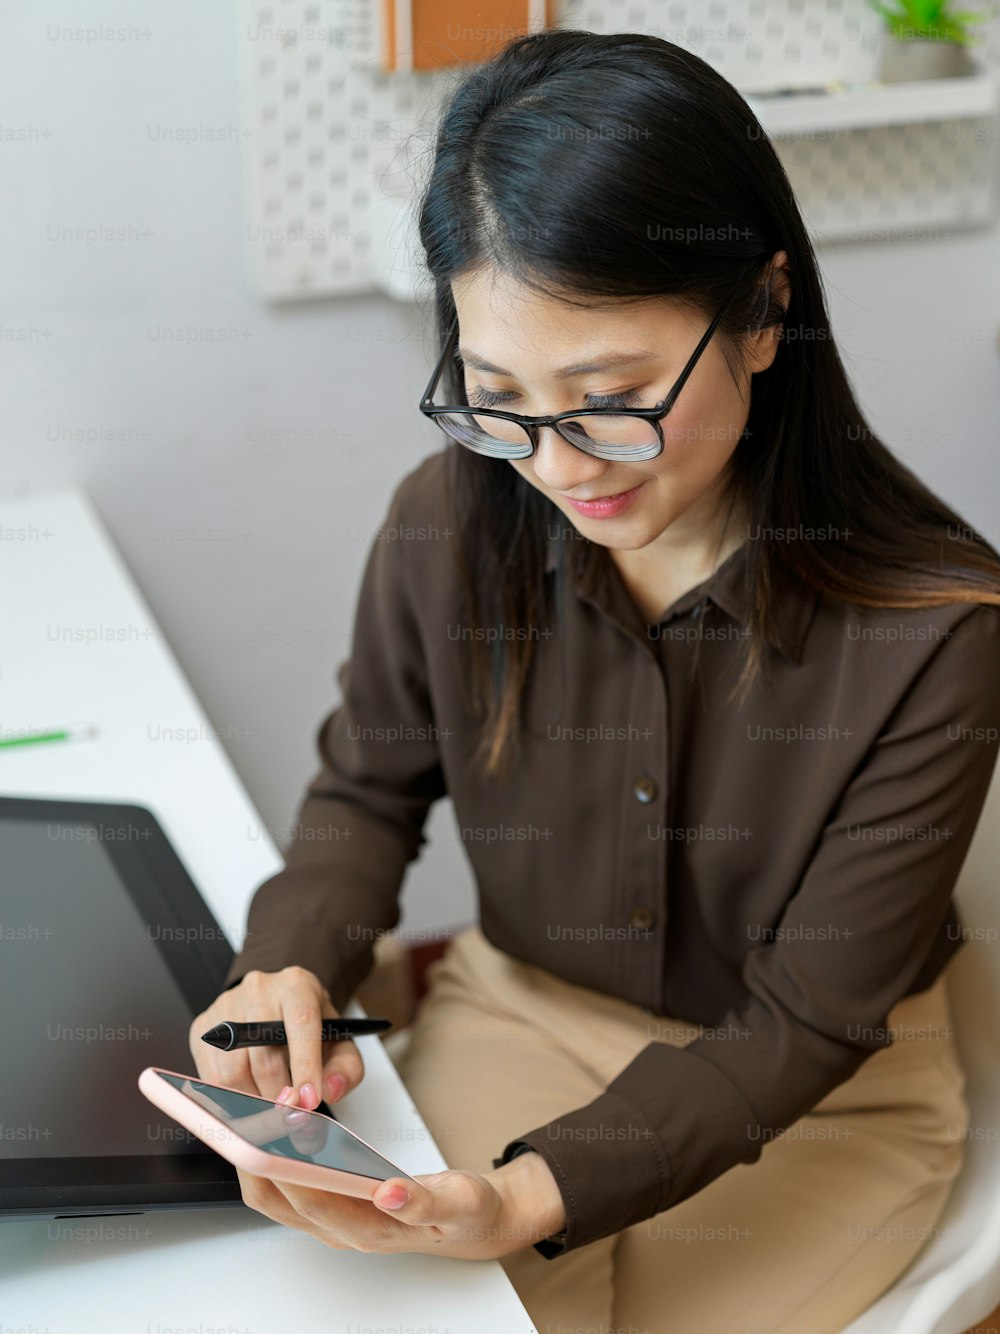 Top view of female office worker with eyeglasses using smartphone while sitting at office desk